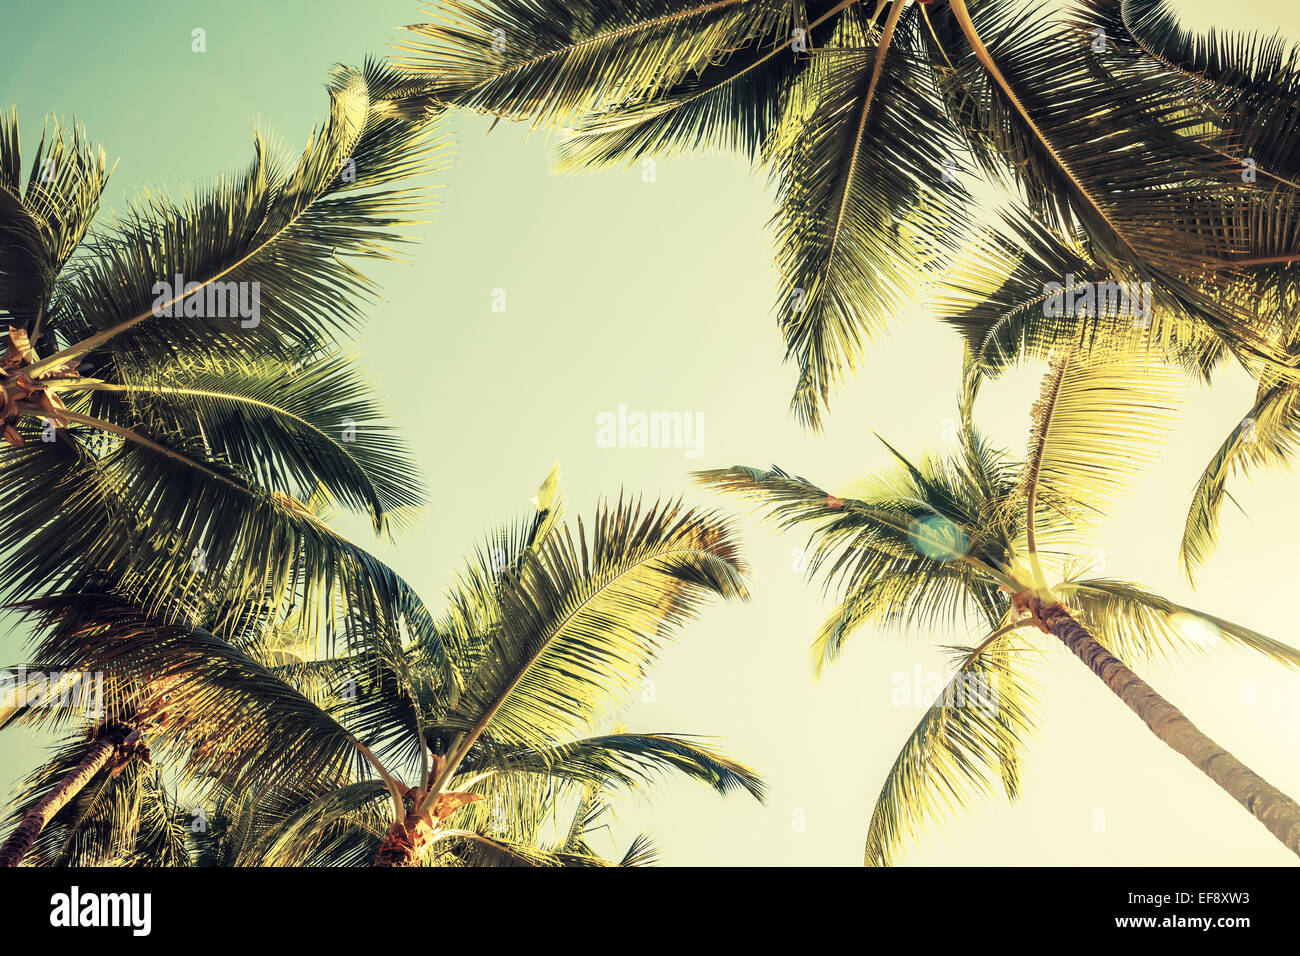 Coconut palm trees over bright sky background. Vintage style. Toned photo with filter effect Stock Photo